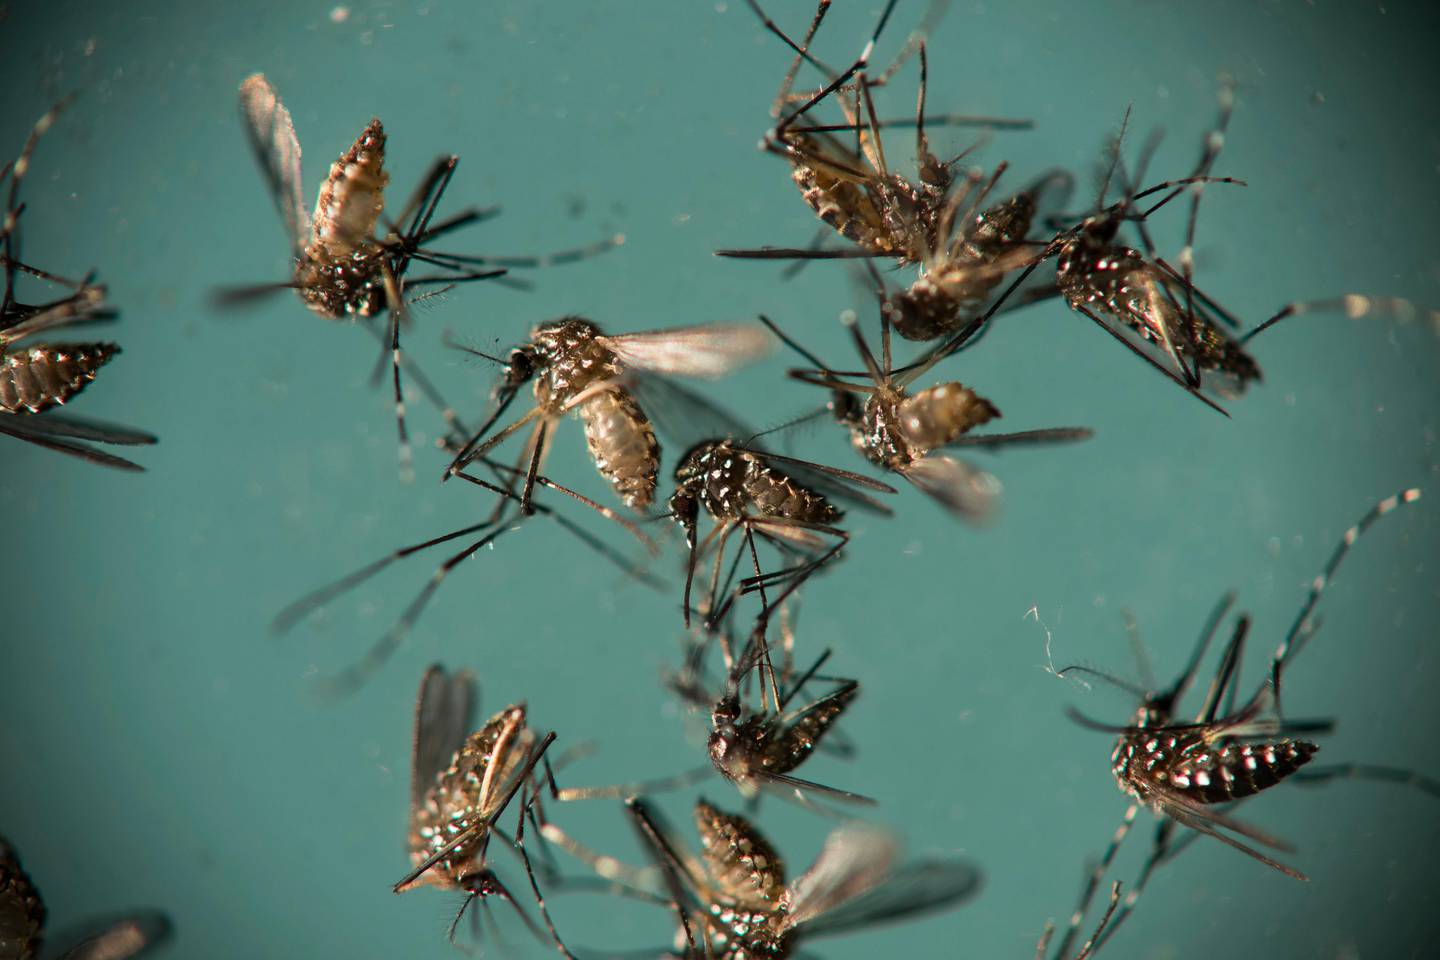 FILE - In this Sept. 29, 2016 file photo, Aedes aegypti mosquitoes, responsible for transmitting Zika, sit in a petri dish at the Fiocruz Institute in Recife, Brazil. The Zika virus may not seem as big a threat as last summer but don't let your guard down, especially if you're pregnant.  While cases of the birth defect-causing virus have dropped sharply from last year's peak in parts of South America and the Caribbean, Zika hasn't disappeared and remains a threat for U.S. travelers. (AP Photo/Felipe Dana, File)